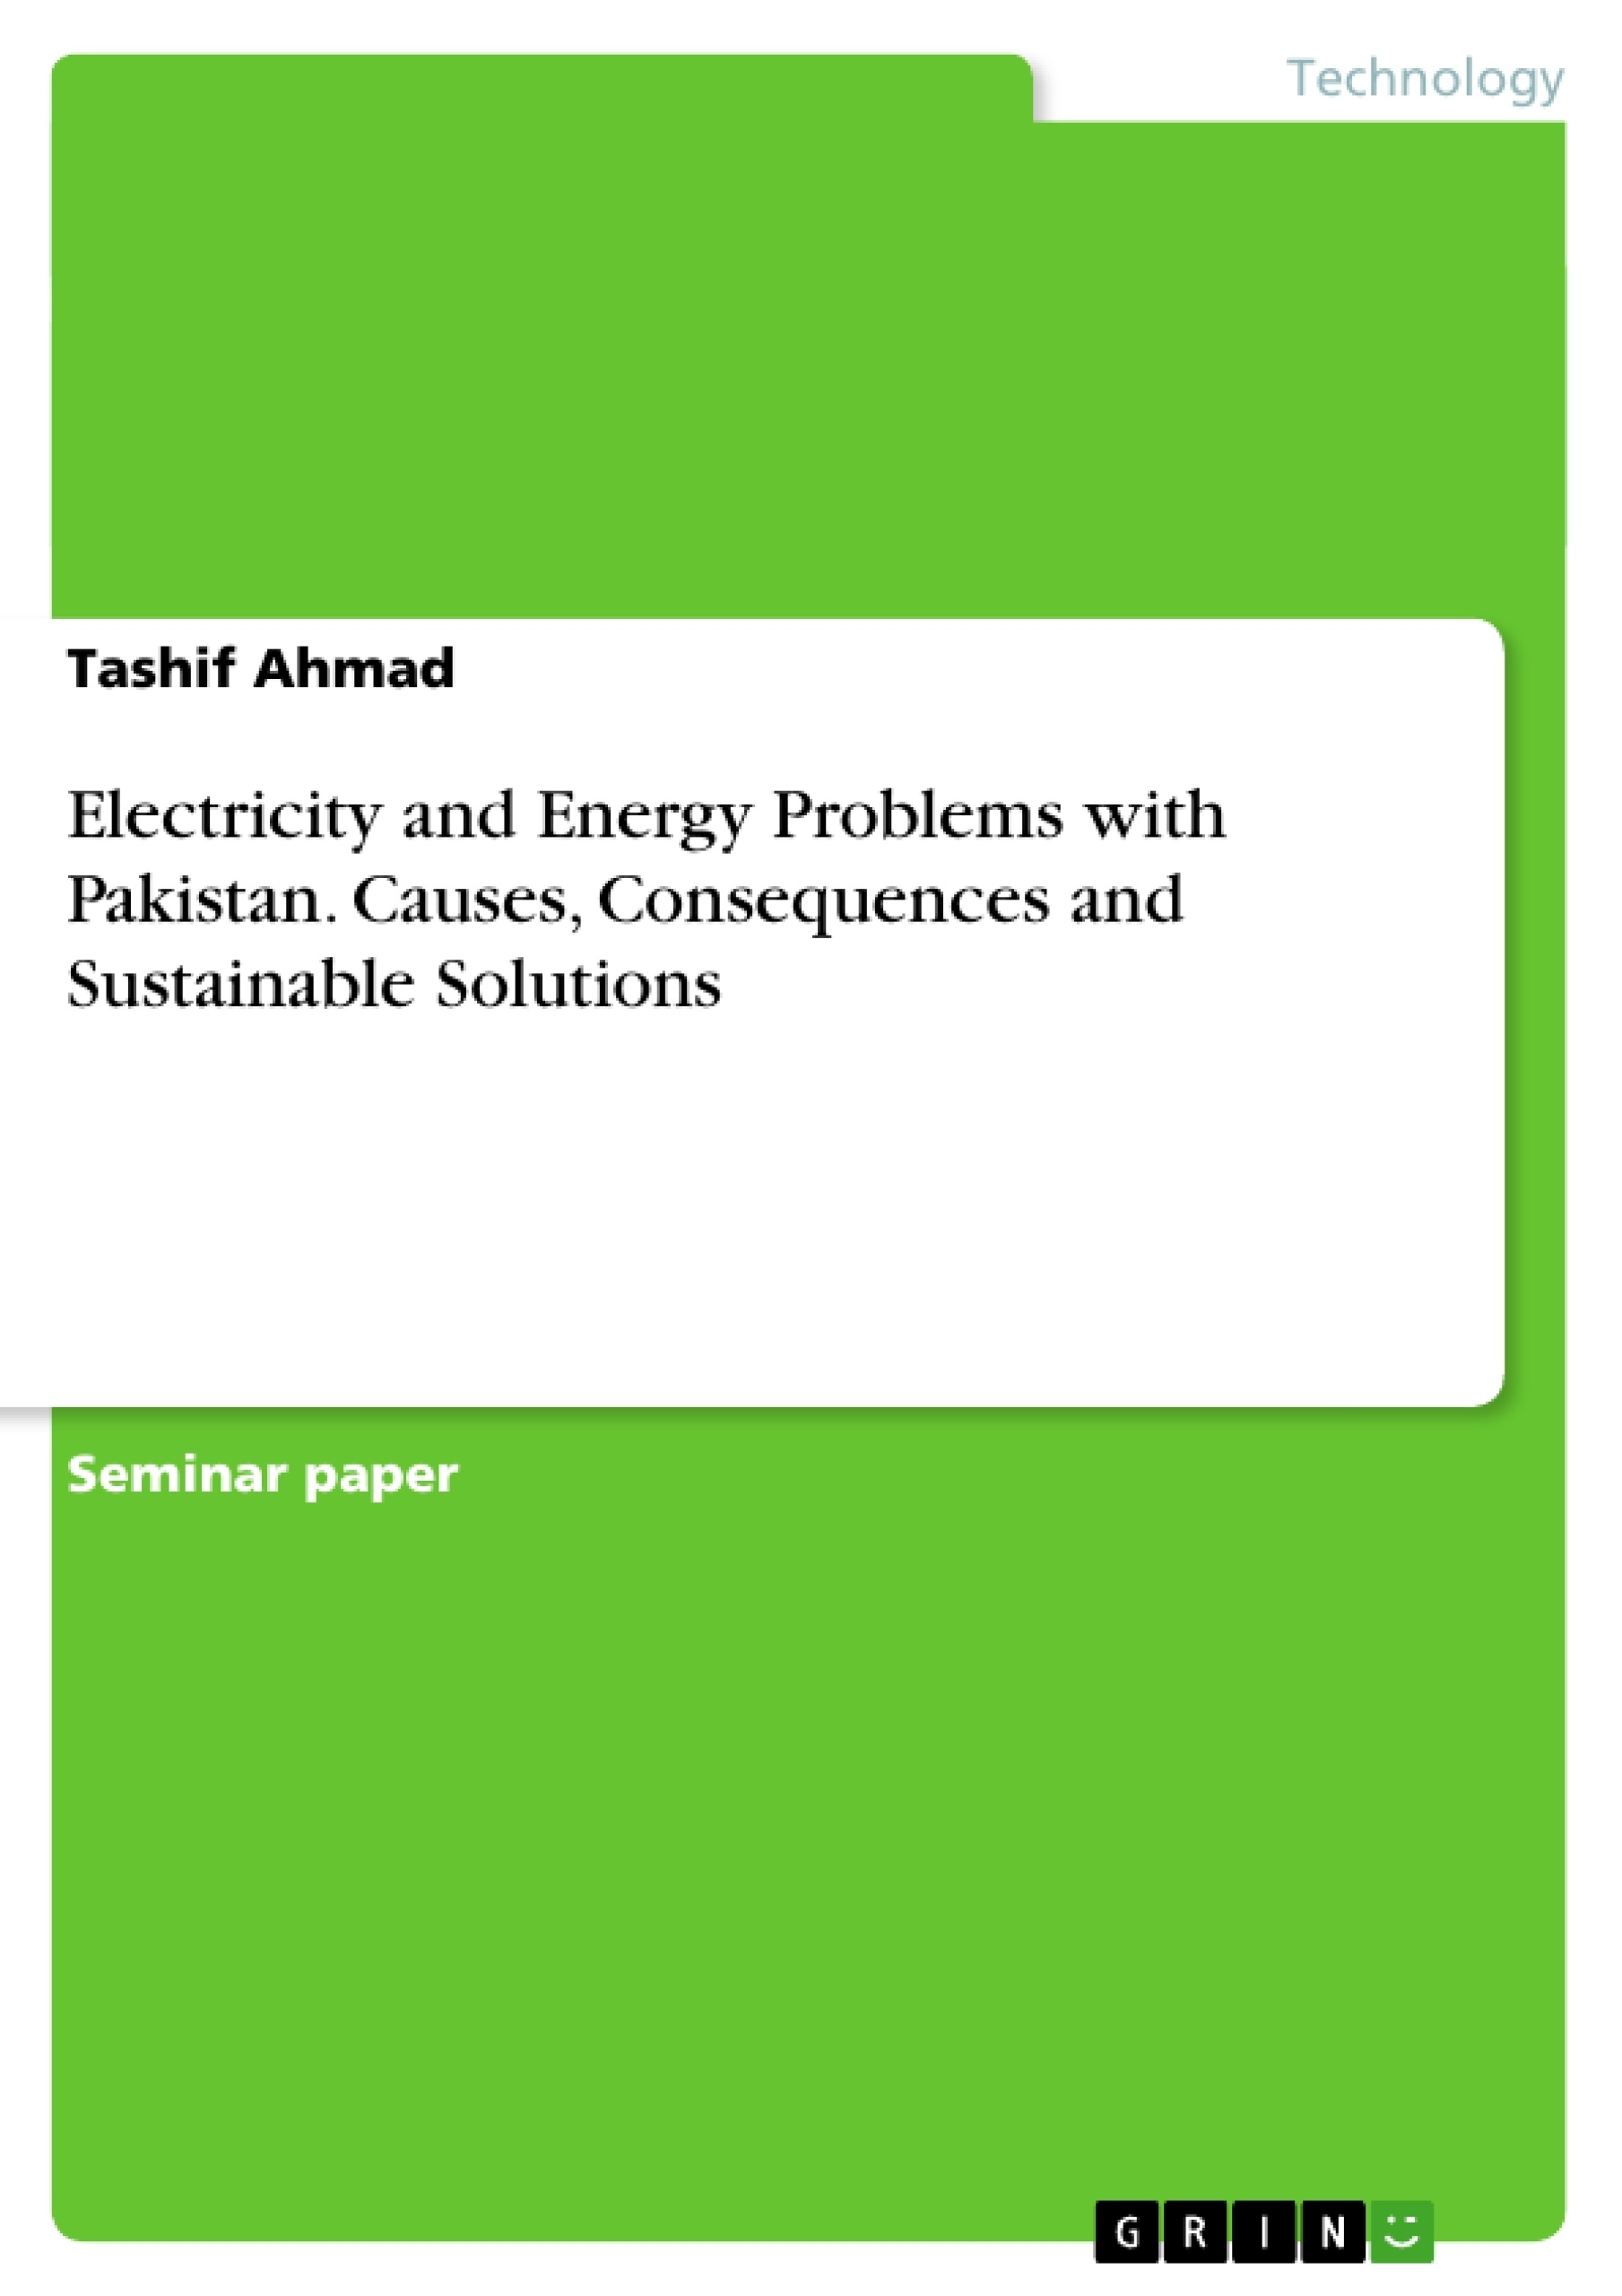 Title: Electricity and Energy Problems with Pakistan. Causes, Consequences and Sustainable Solutions